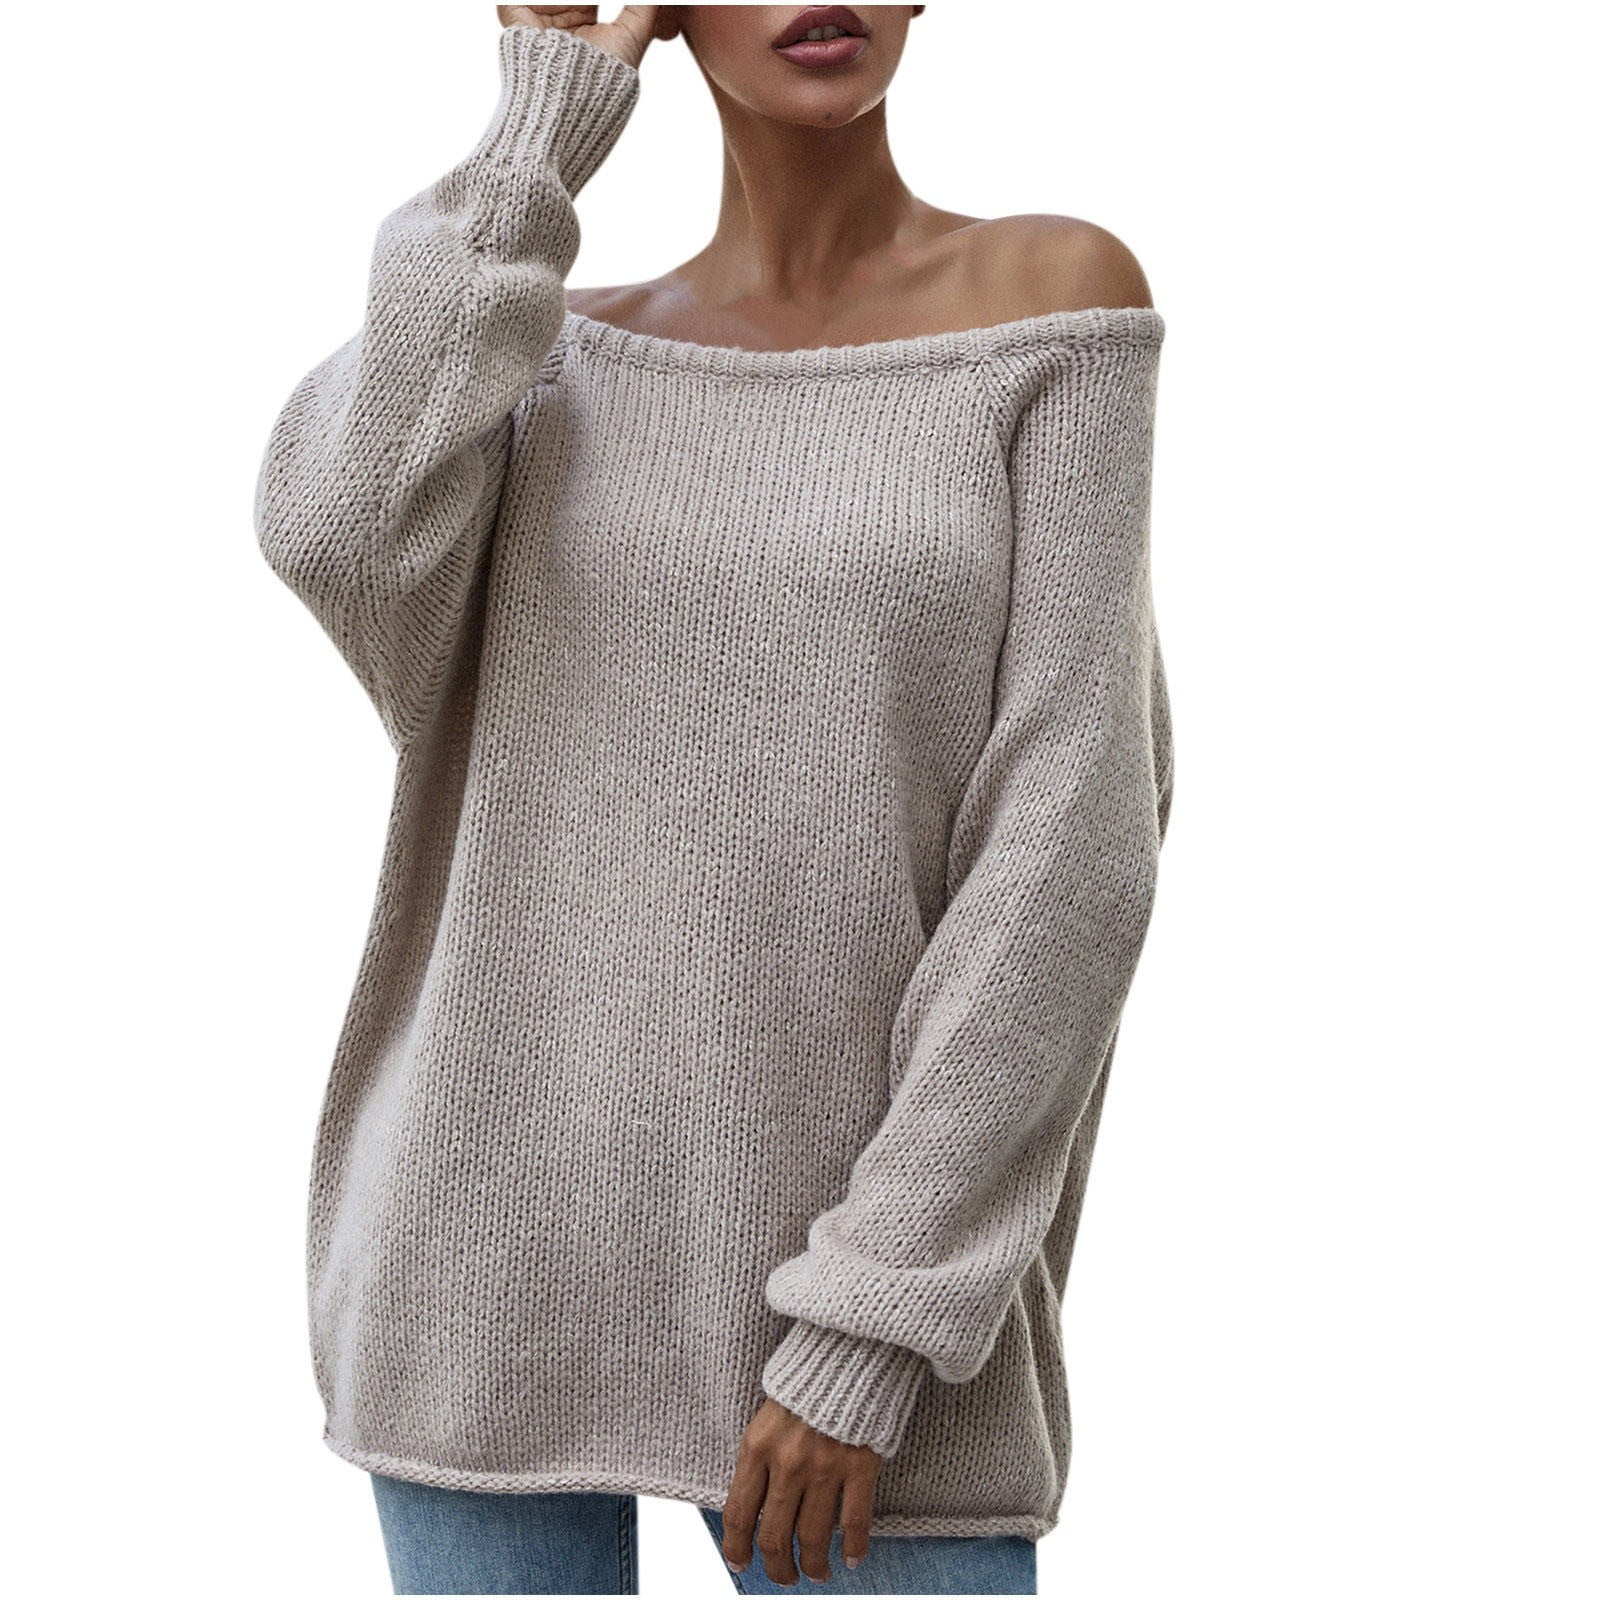 Women Crew Neck Long Sleeve Pullover Top Solid Color Hem Ripped,Overstock  Items Clearance All,Under 5 Dollar,Coupons for Prime Members,pallets for  Sale Liquidation